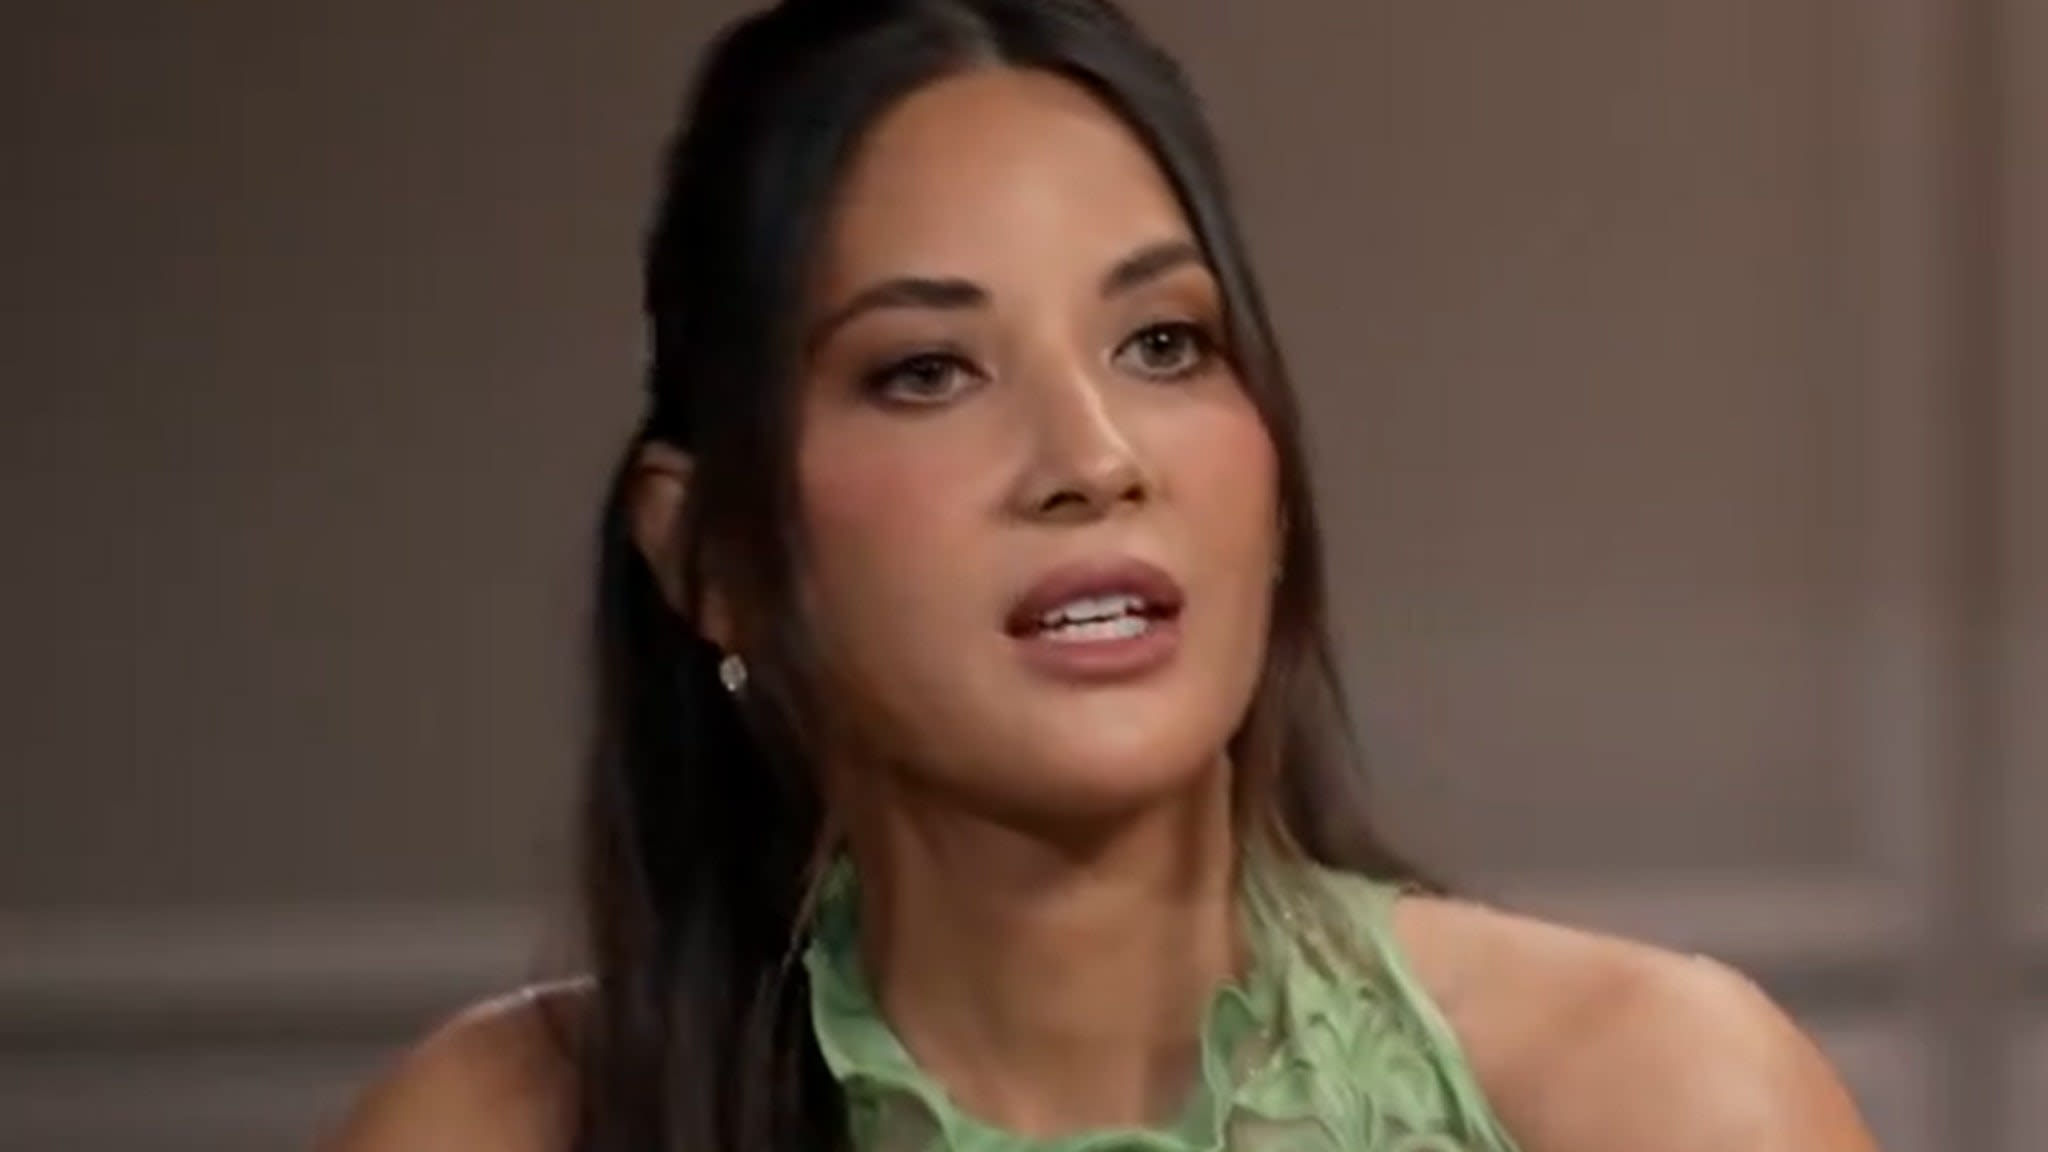 Olivia Munn Documented Breast Cancer Battle to Show Son She 'Fought to Be Here'